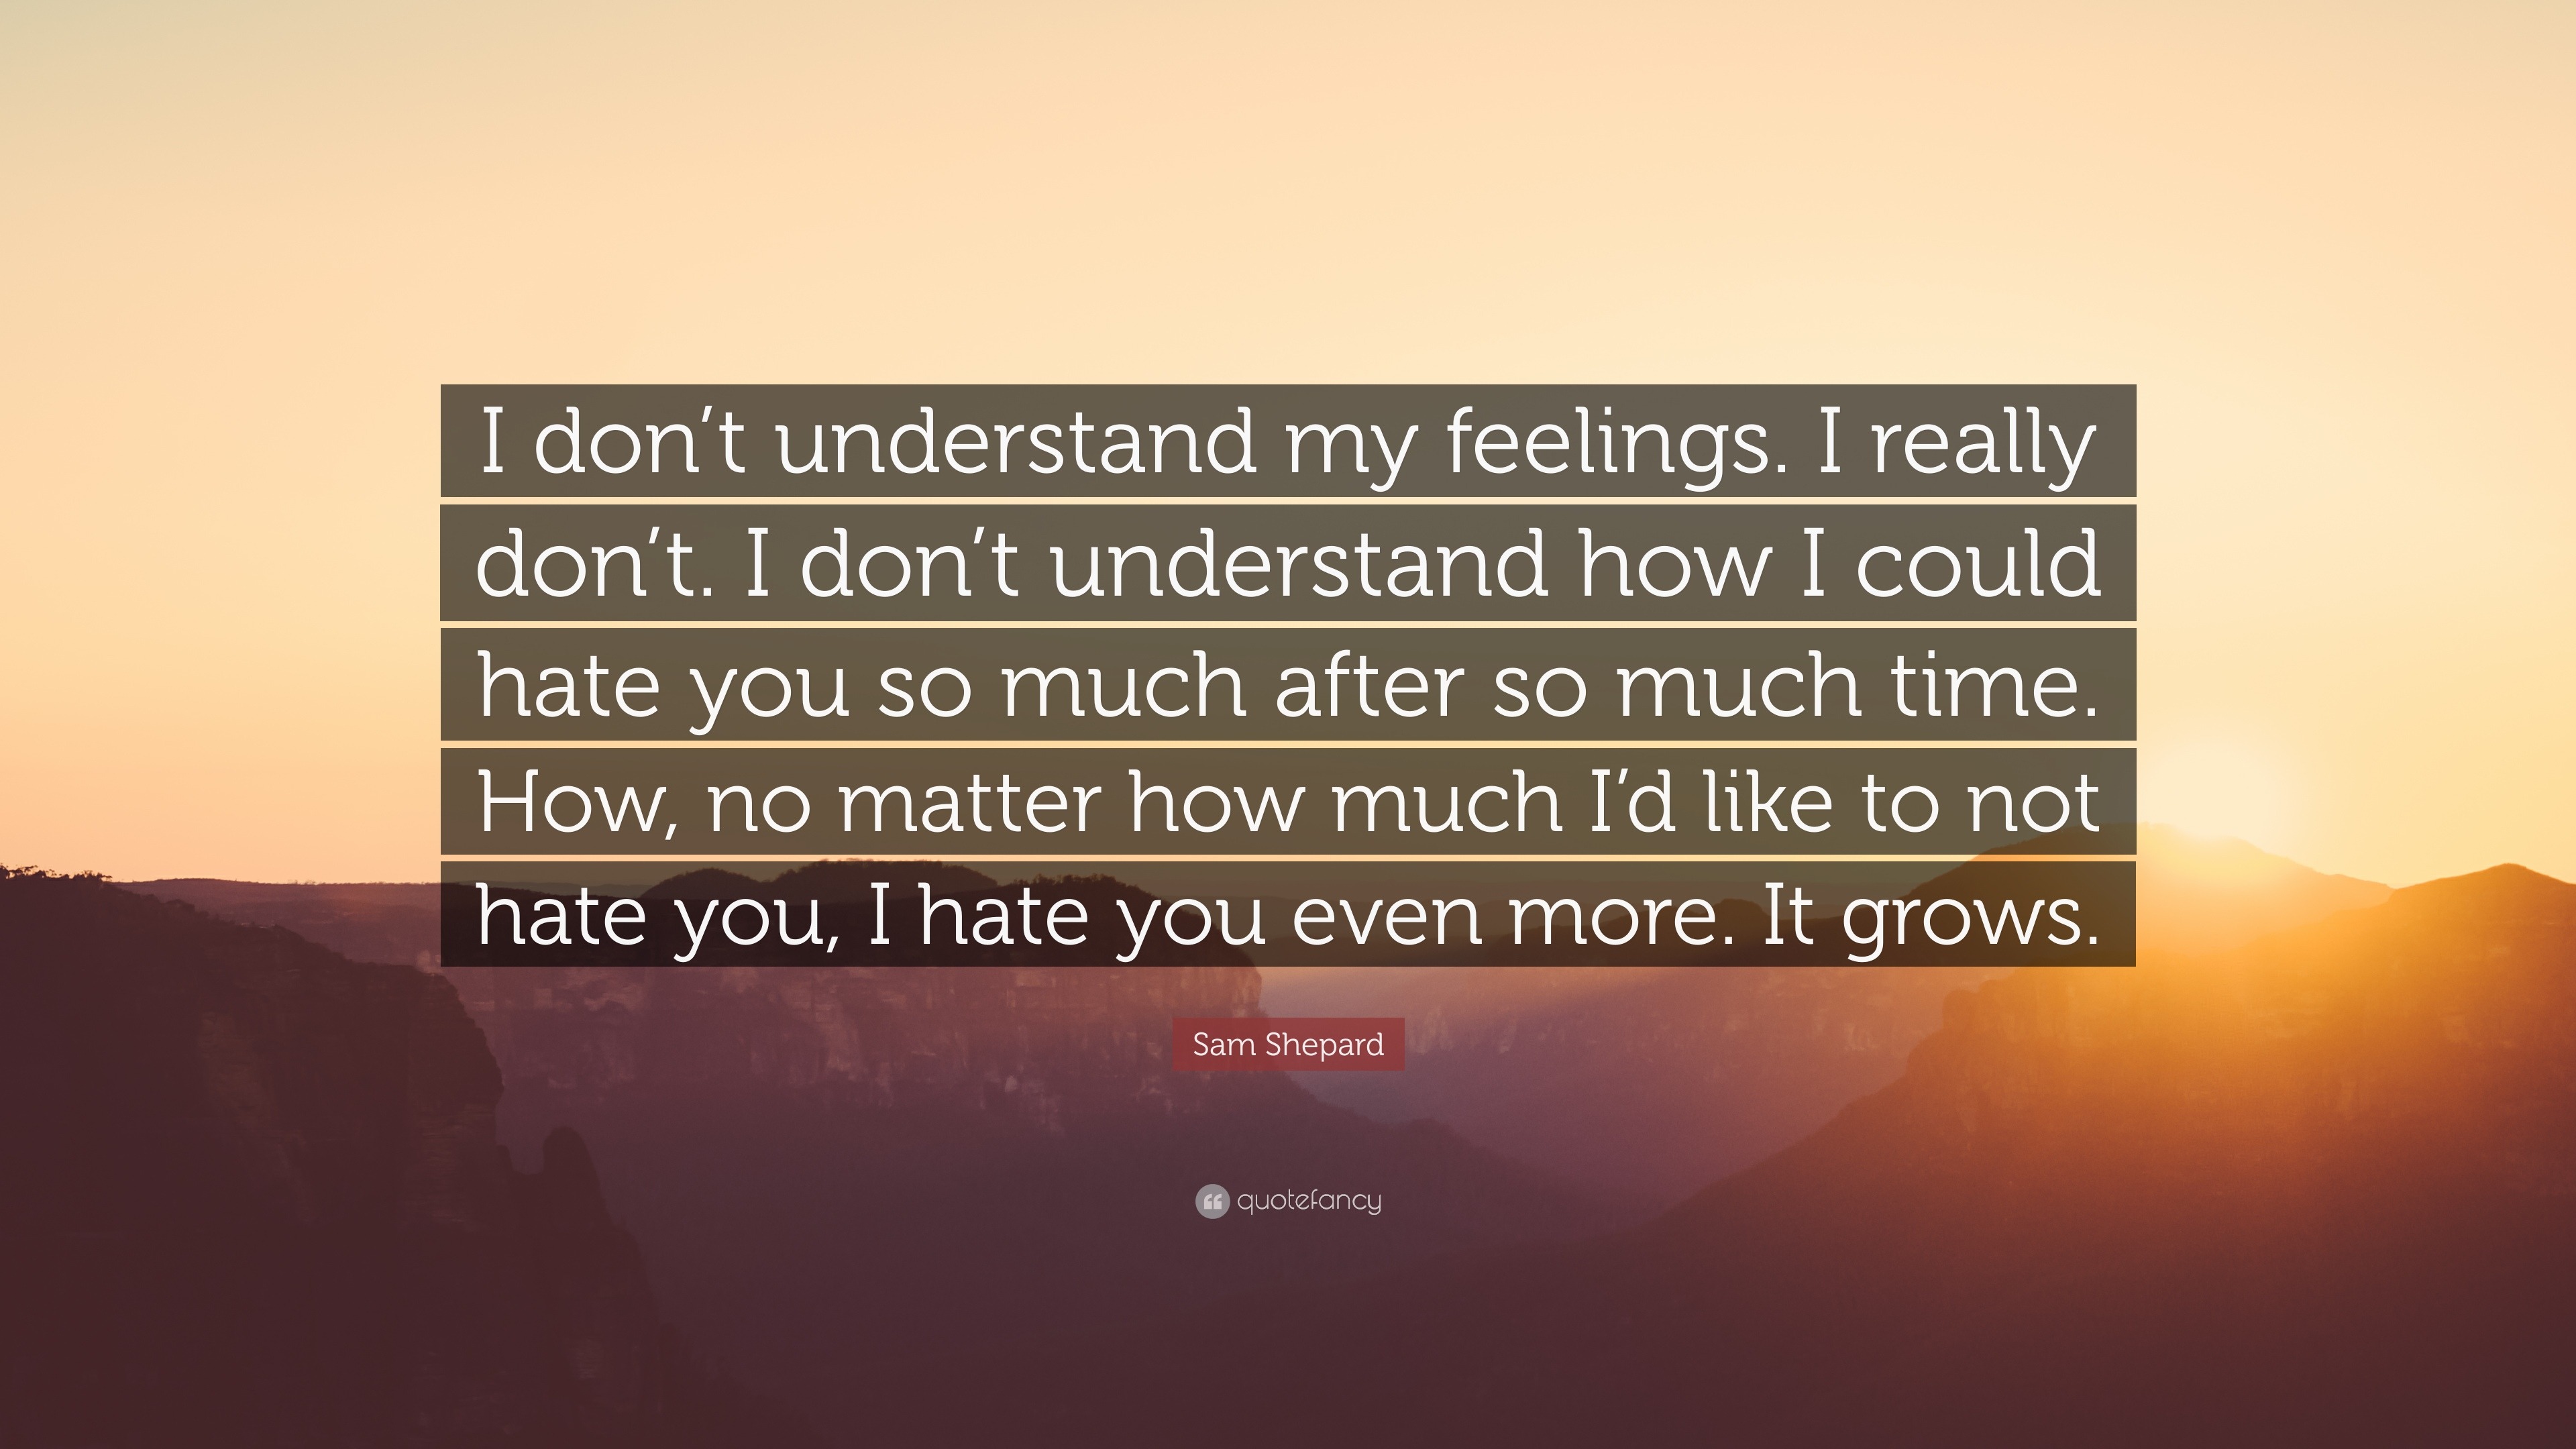 Sam Shepard Quote I Don T Understand My Feelings I Really Don T I Don T Understand How I Could Hate You So Much After So Much Time How